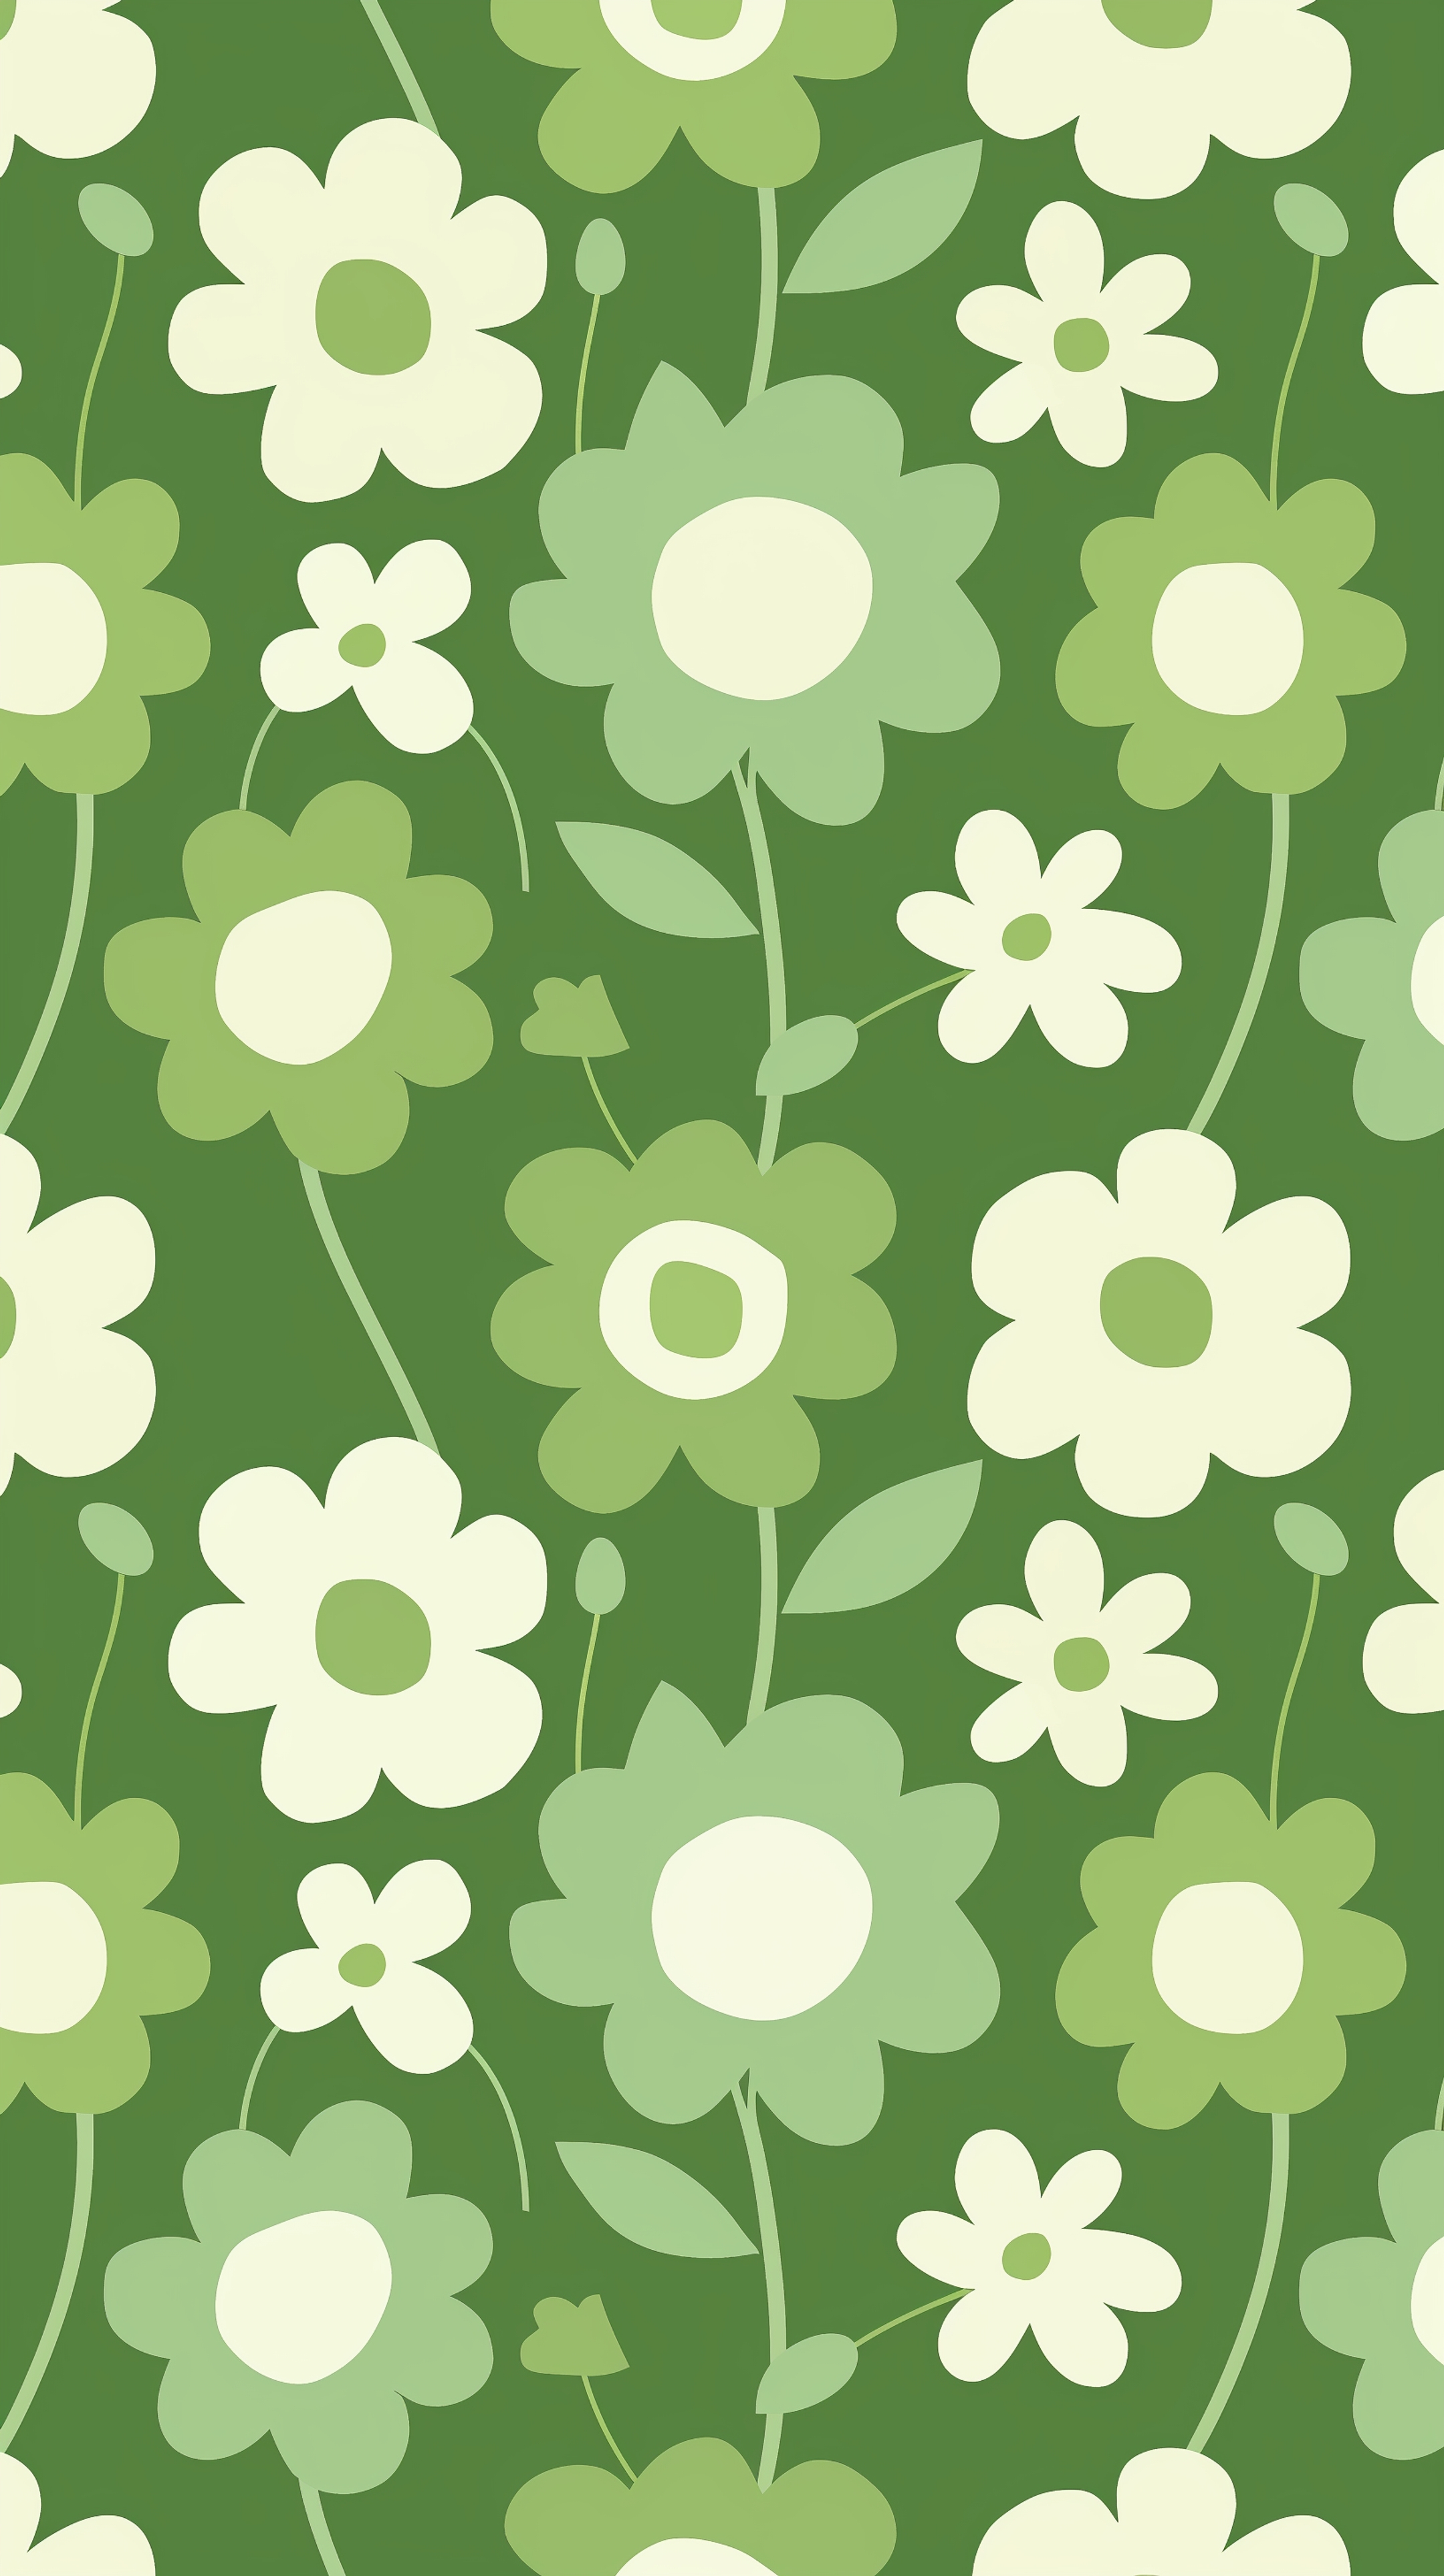 Green and White Floral Pattern for Kids Wallpaper[297654a0d56a4ec28c4e]